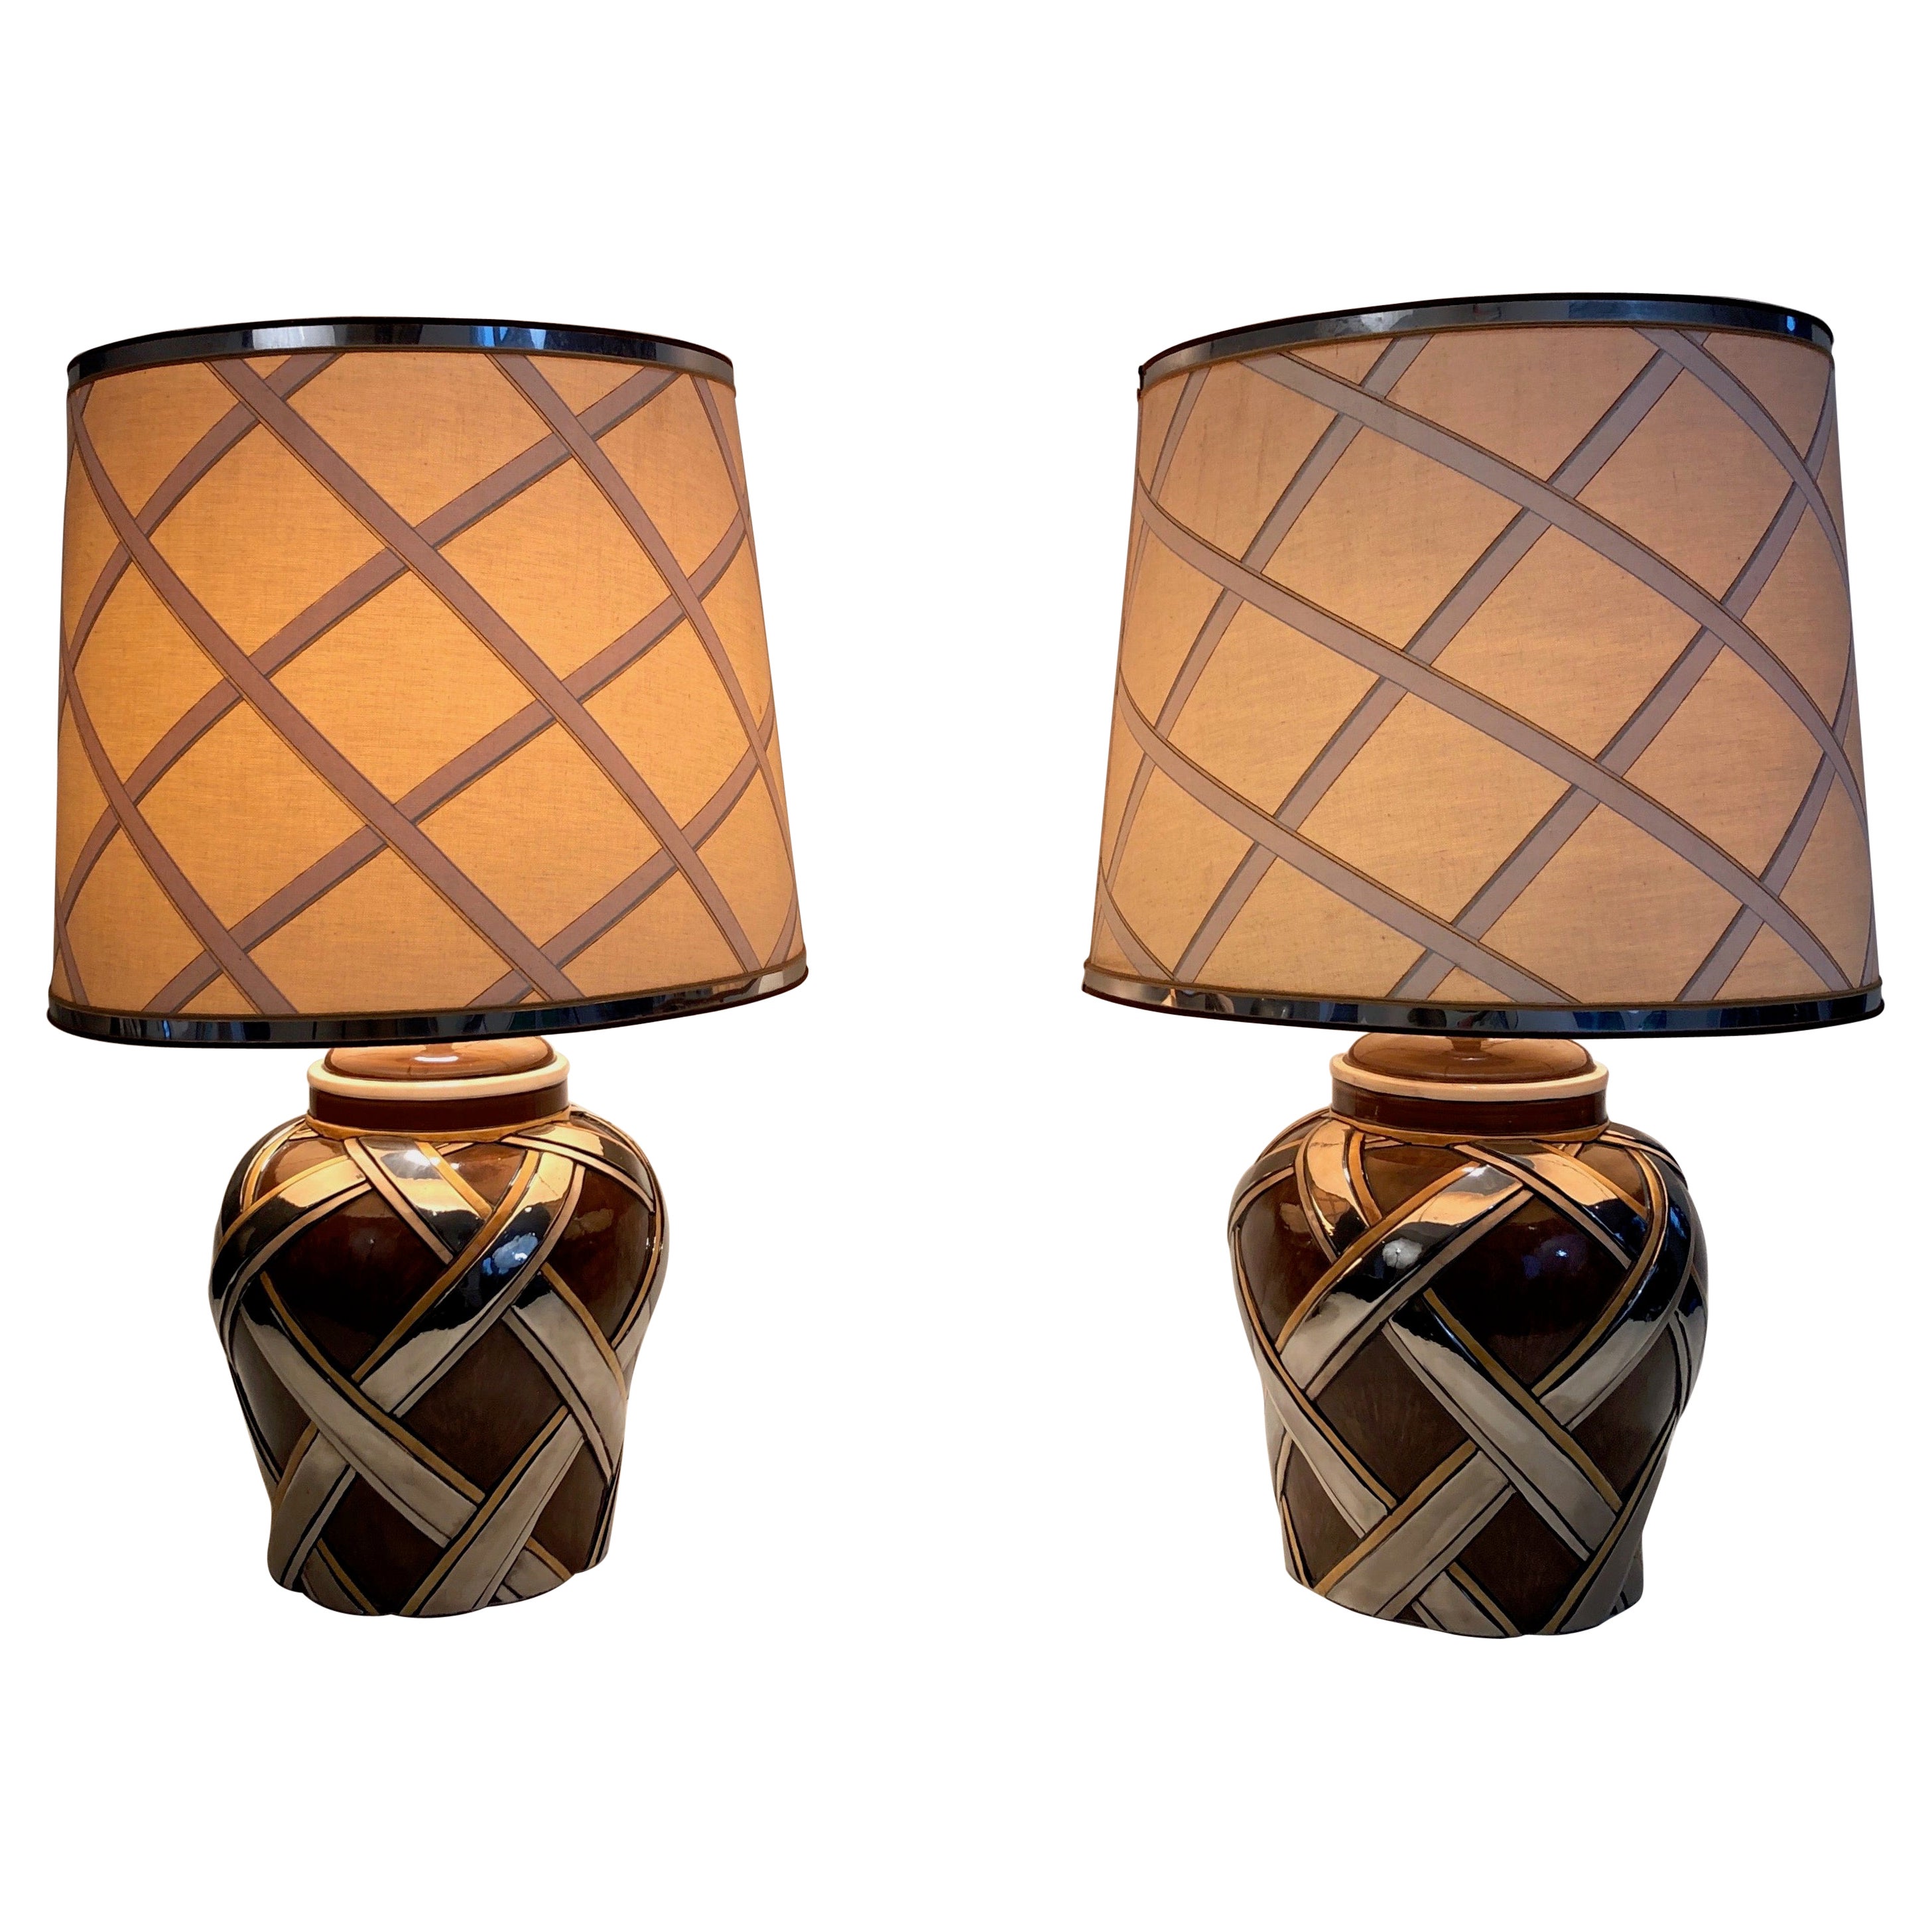 Important Pair of Ceramic Lamps with Ribbons Decor, French, Circa 1970